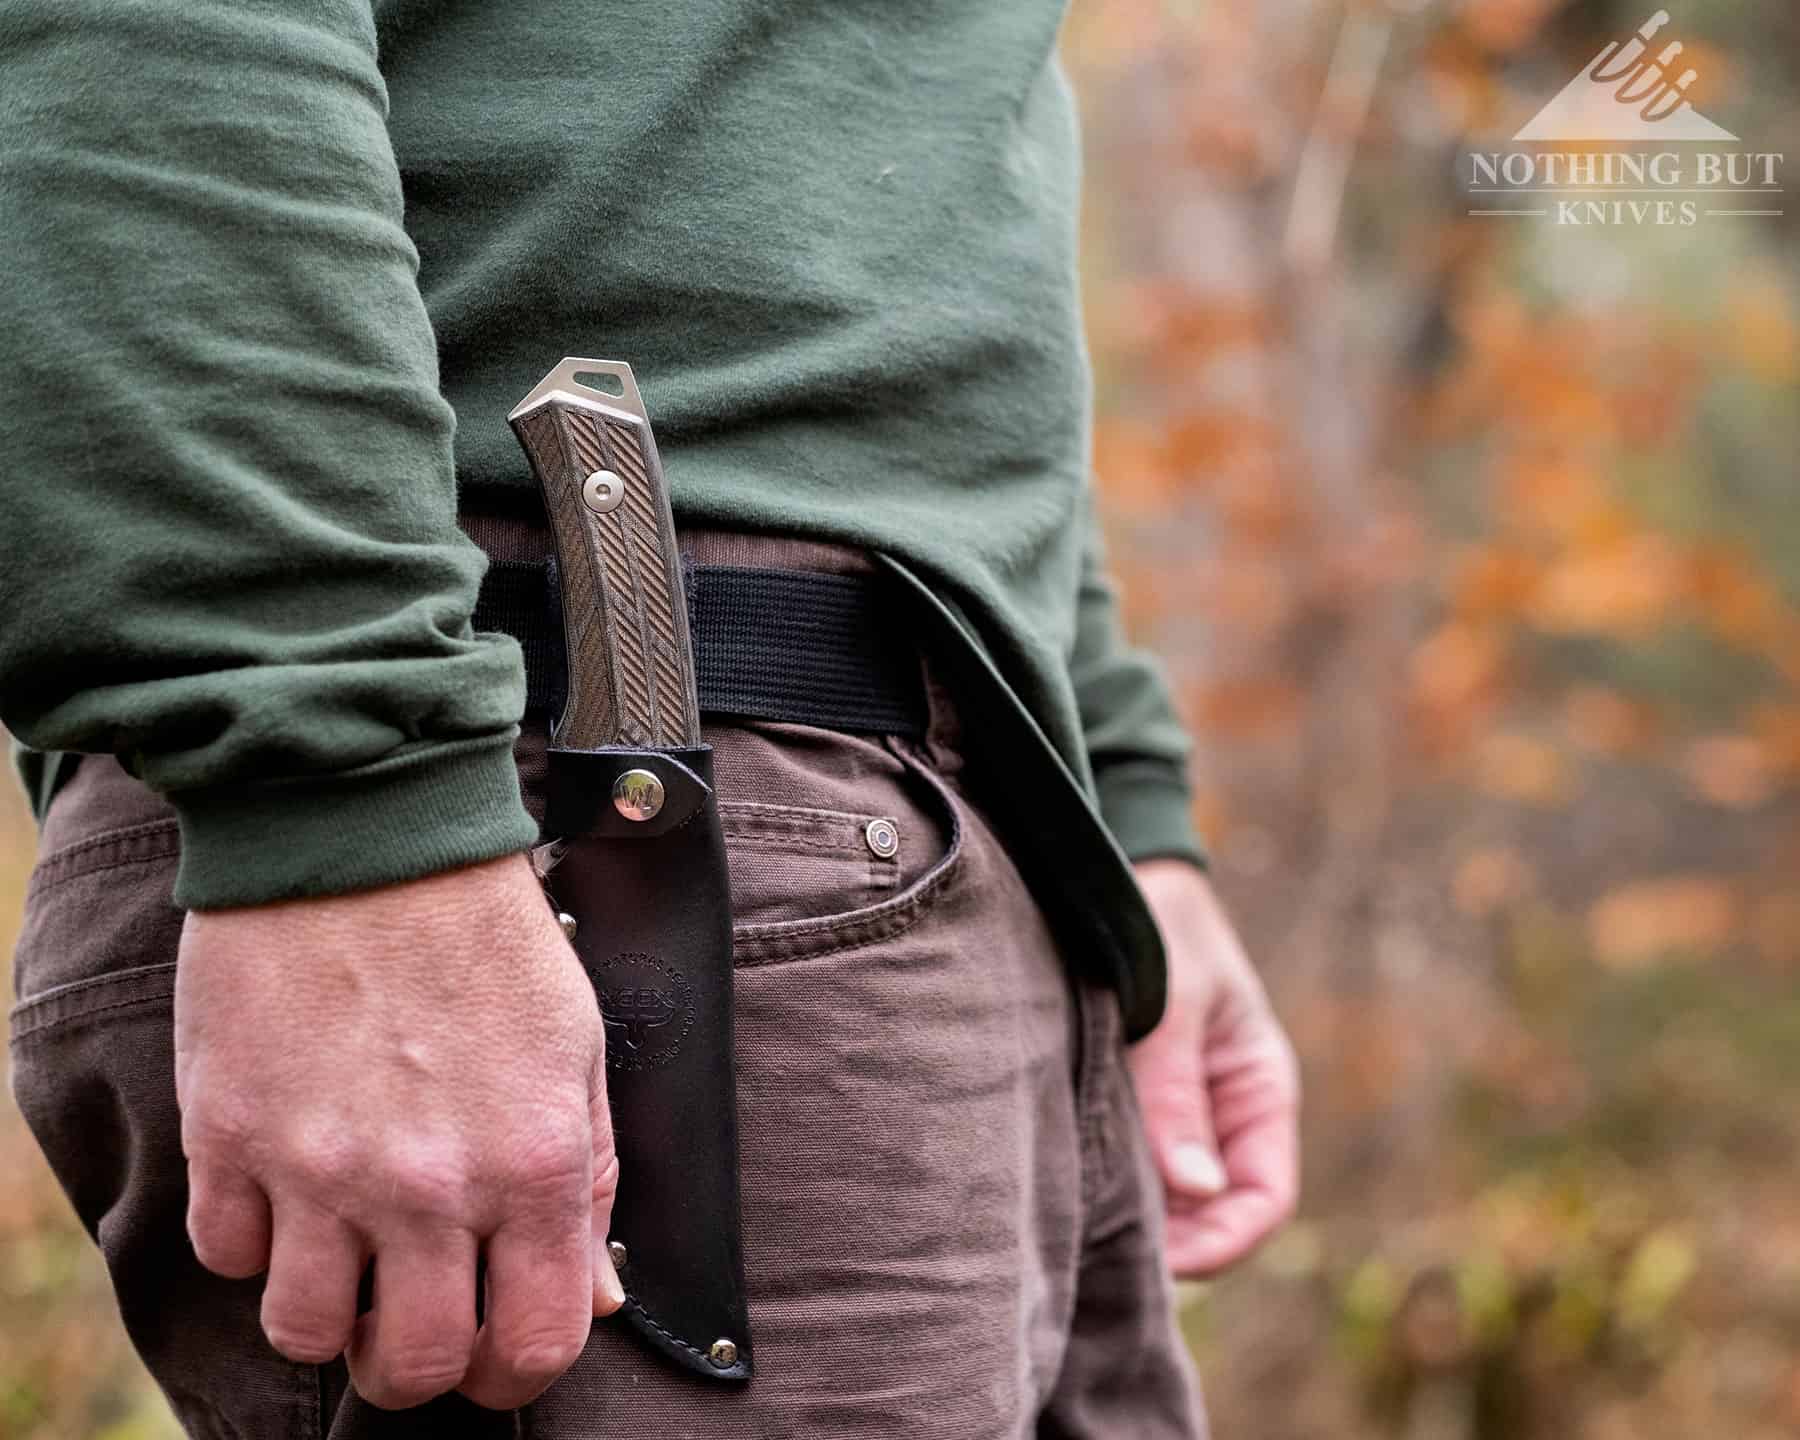 The Woox Rock 62 in a sheath on a person's belt to show scale and the ideal carry position. 